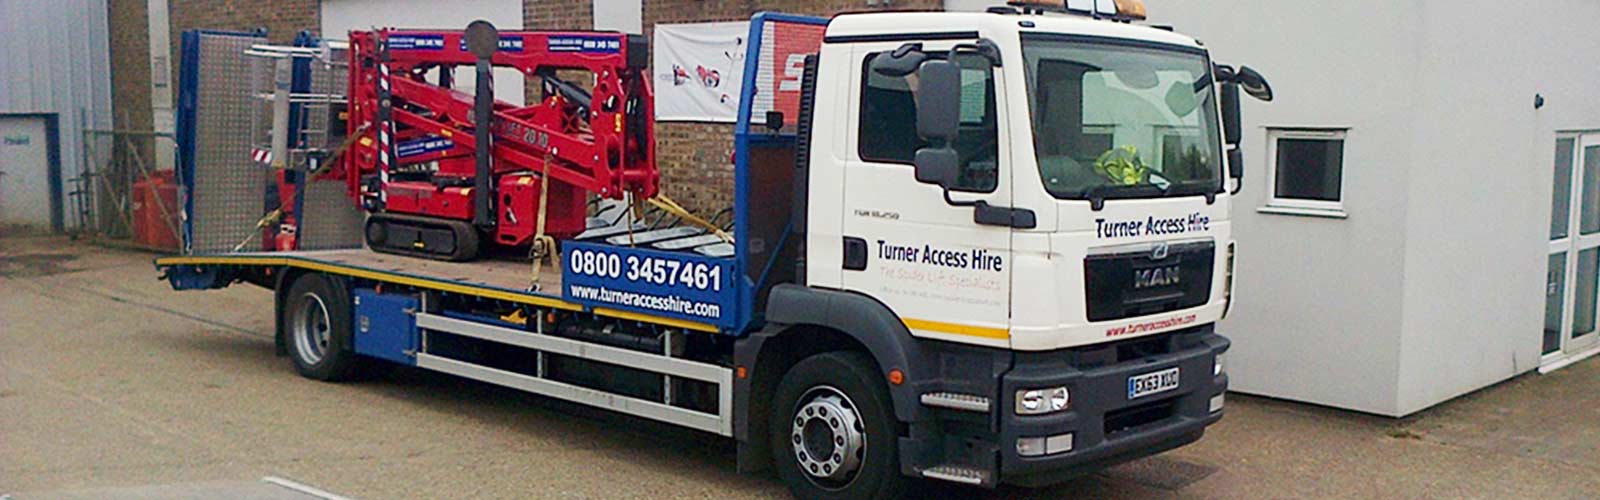 turner_access_hire_lorry